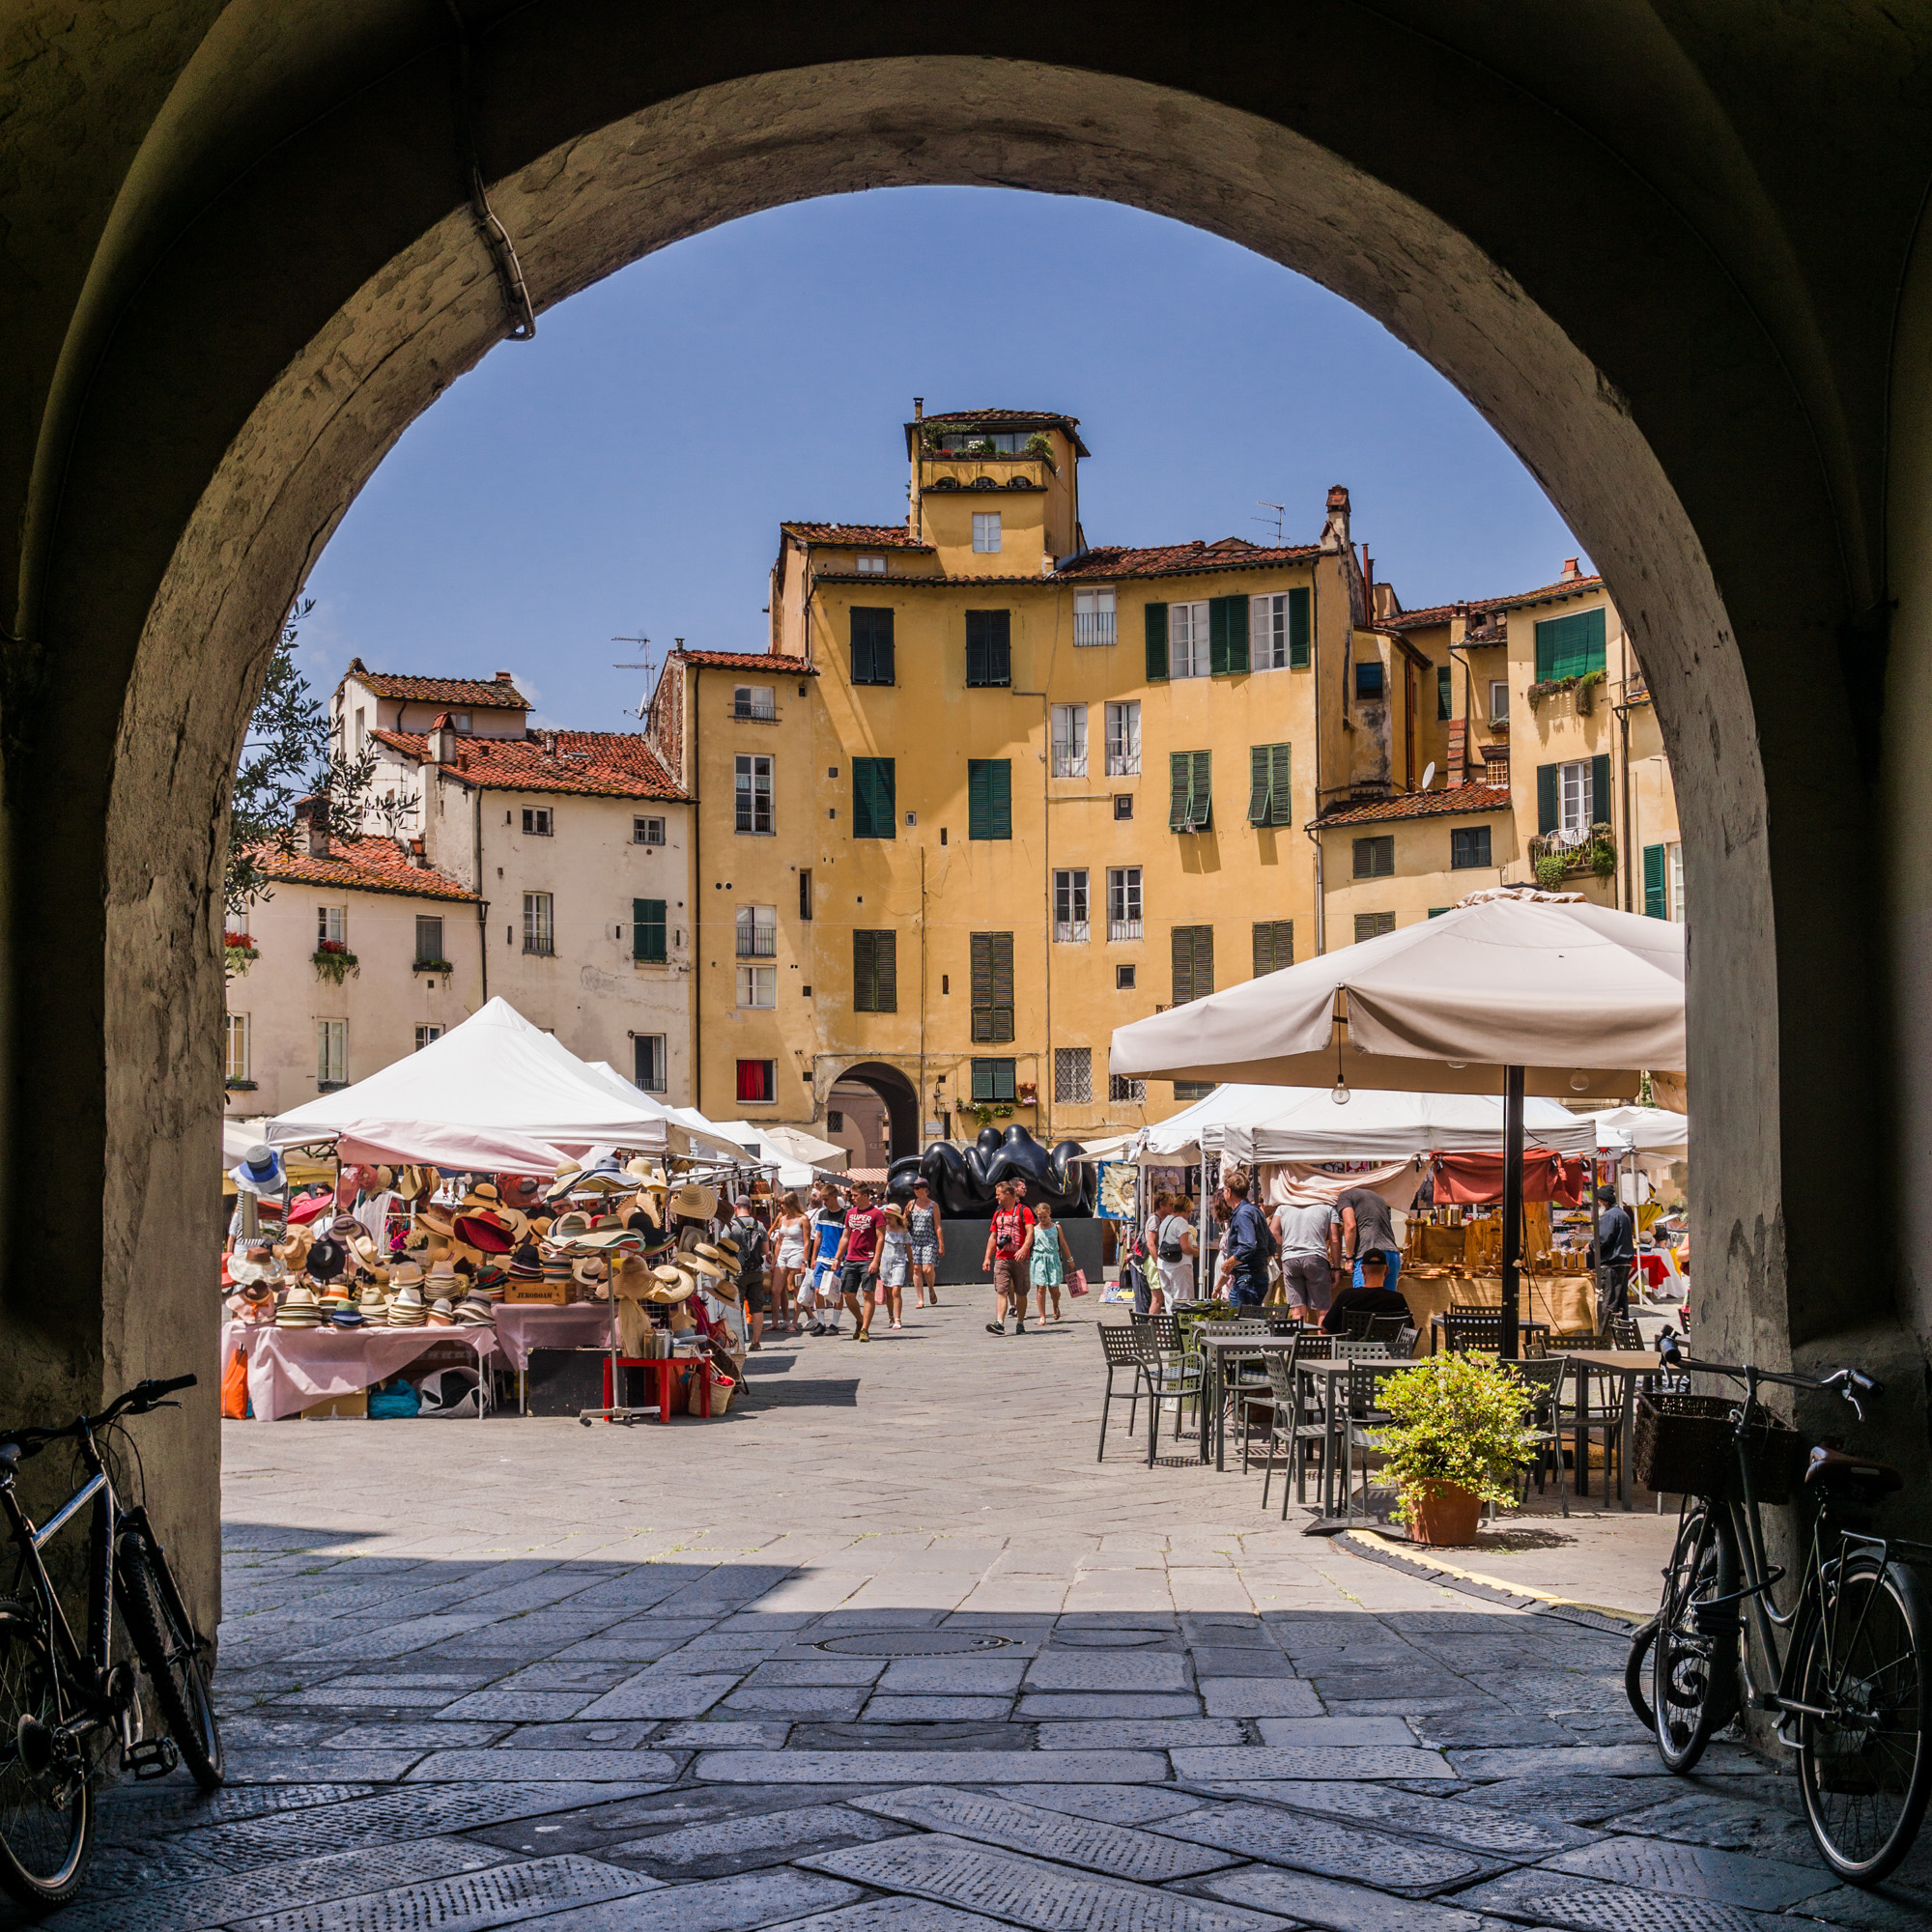 France/Italy roadtrip – Lucca